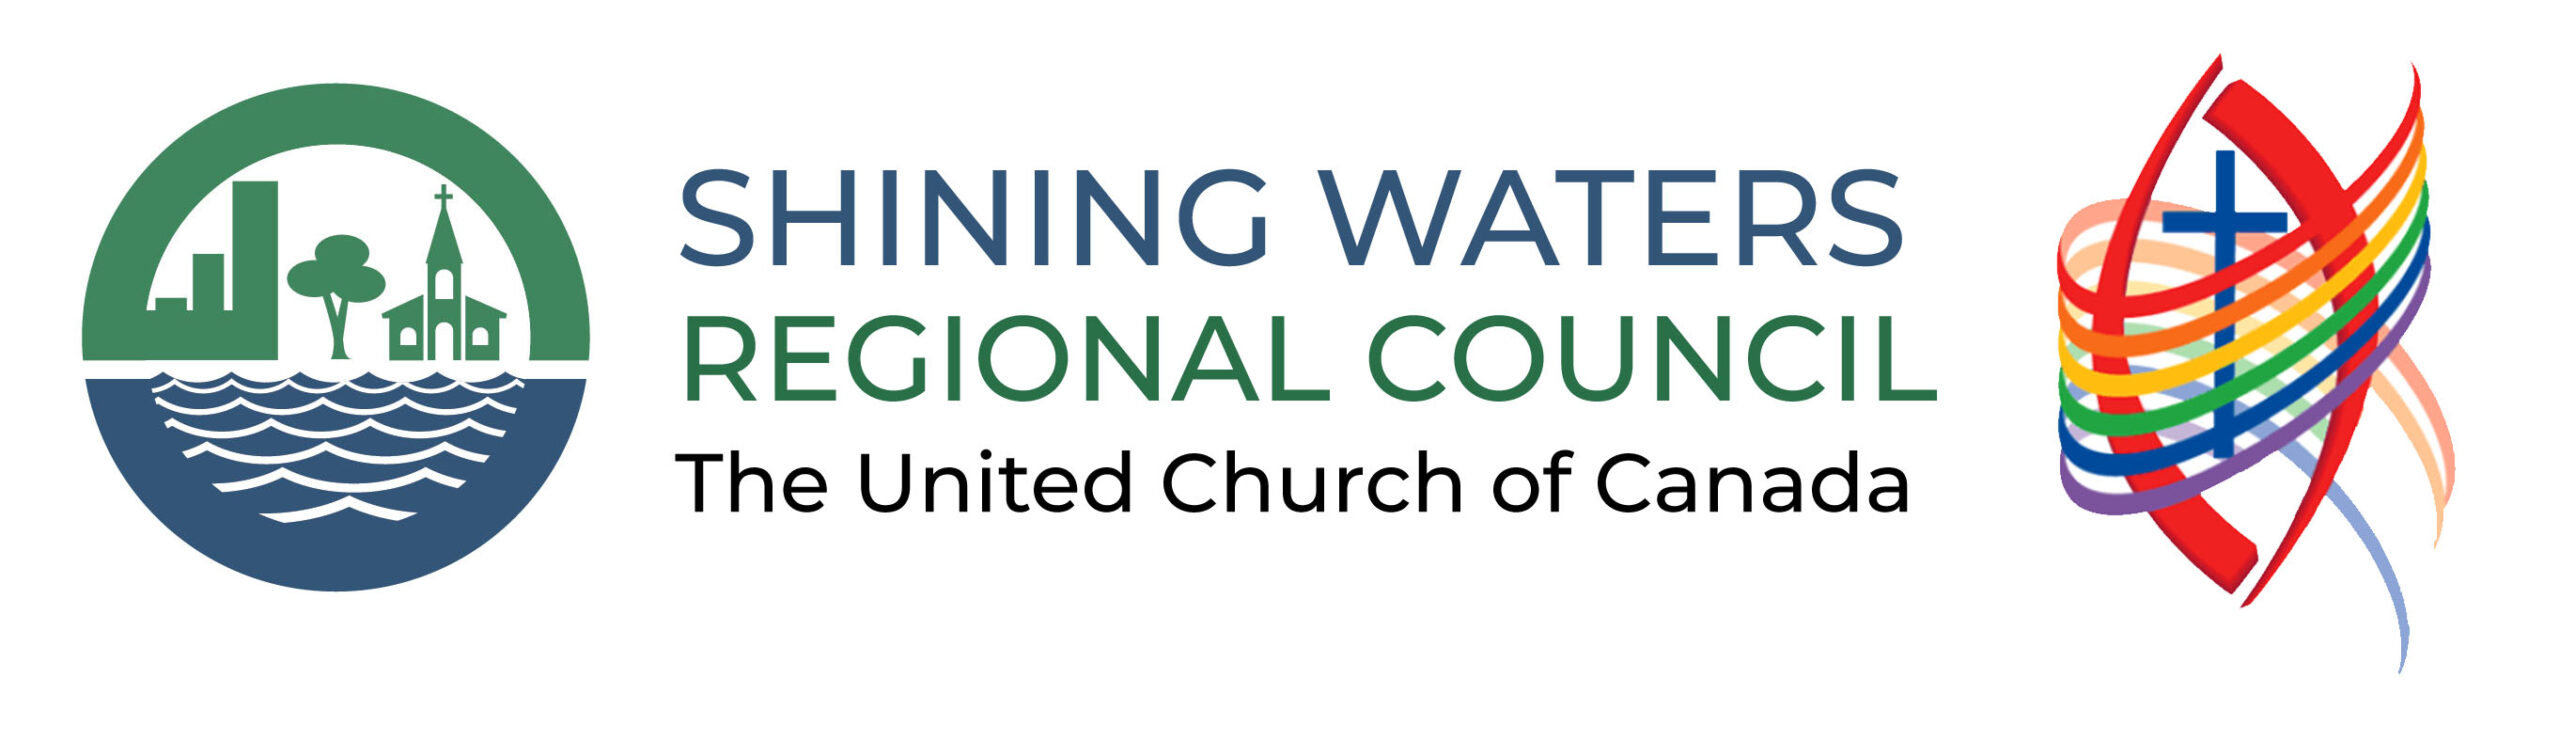 shining waters regional council logo and affirm 